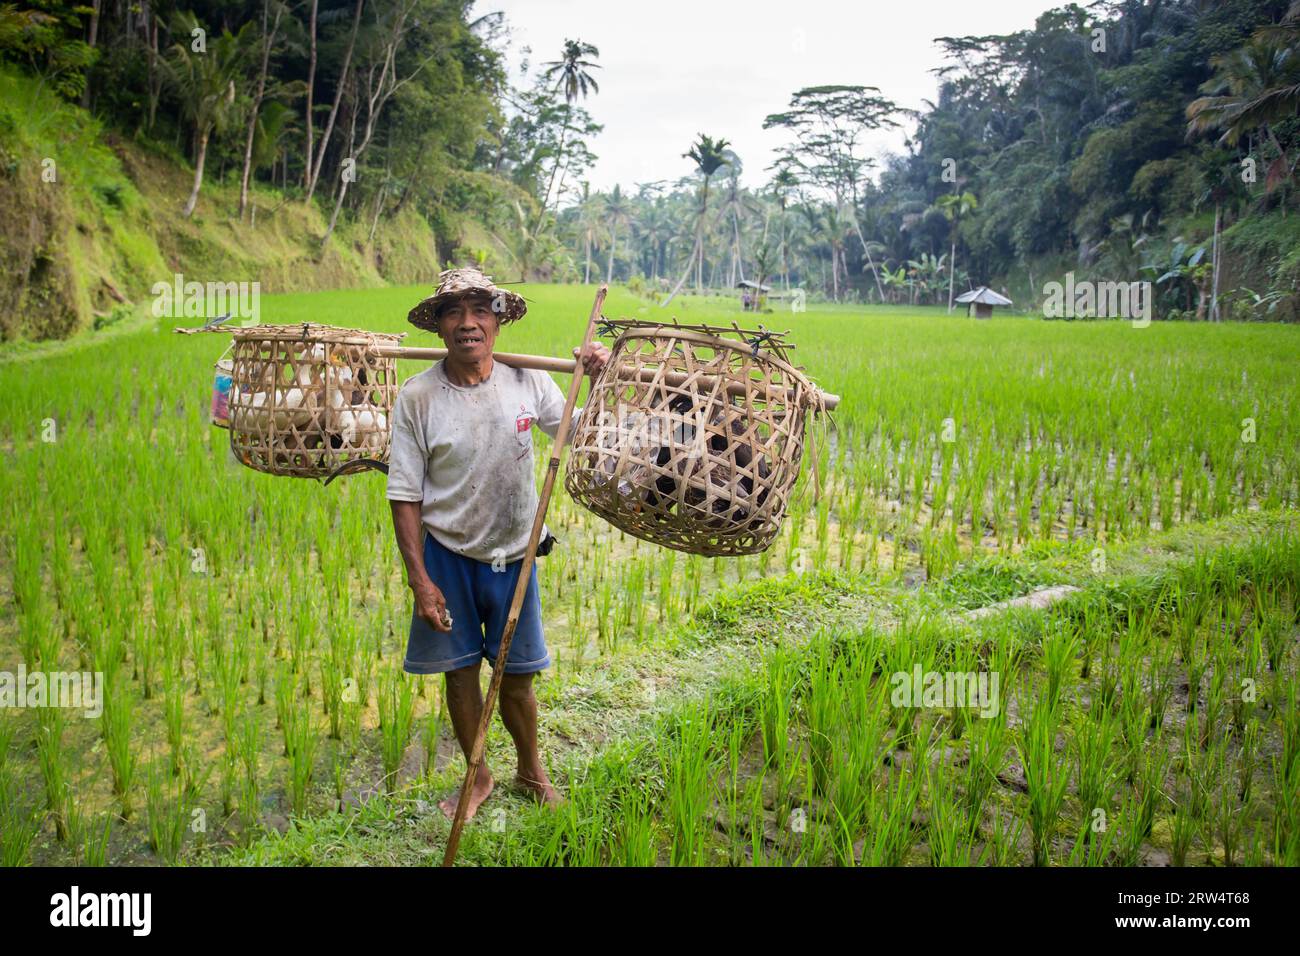 Bali, Indonesia, Sept 2nd: A local farmer carries his animals across rice fields on a hot sunny afternoon on 2nd September 2014 Stock Photo